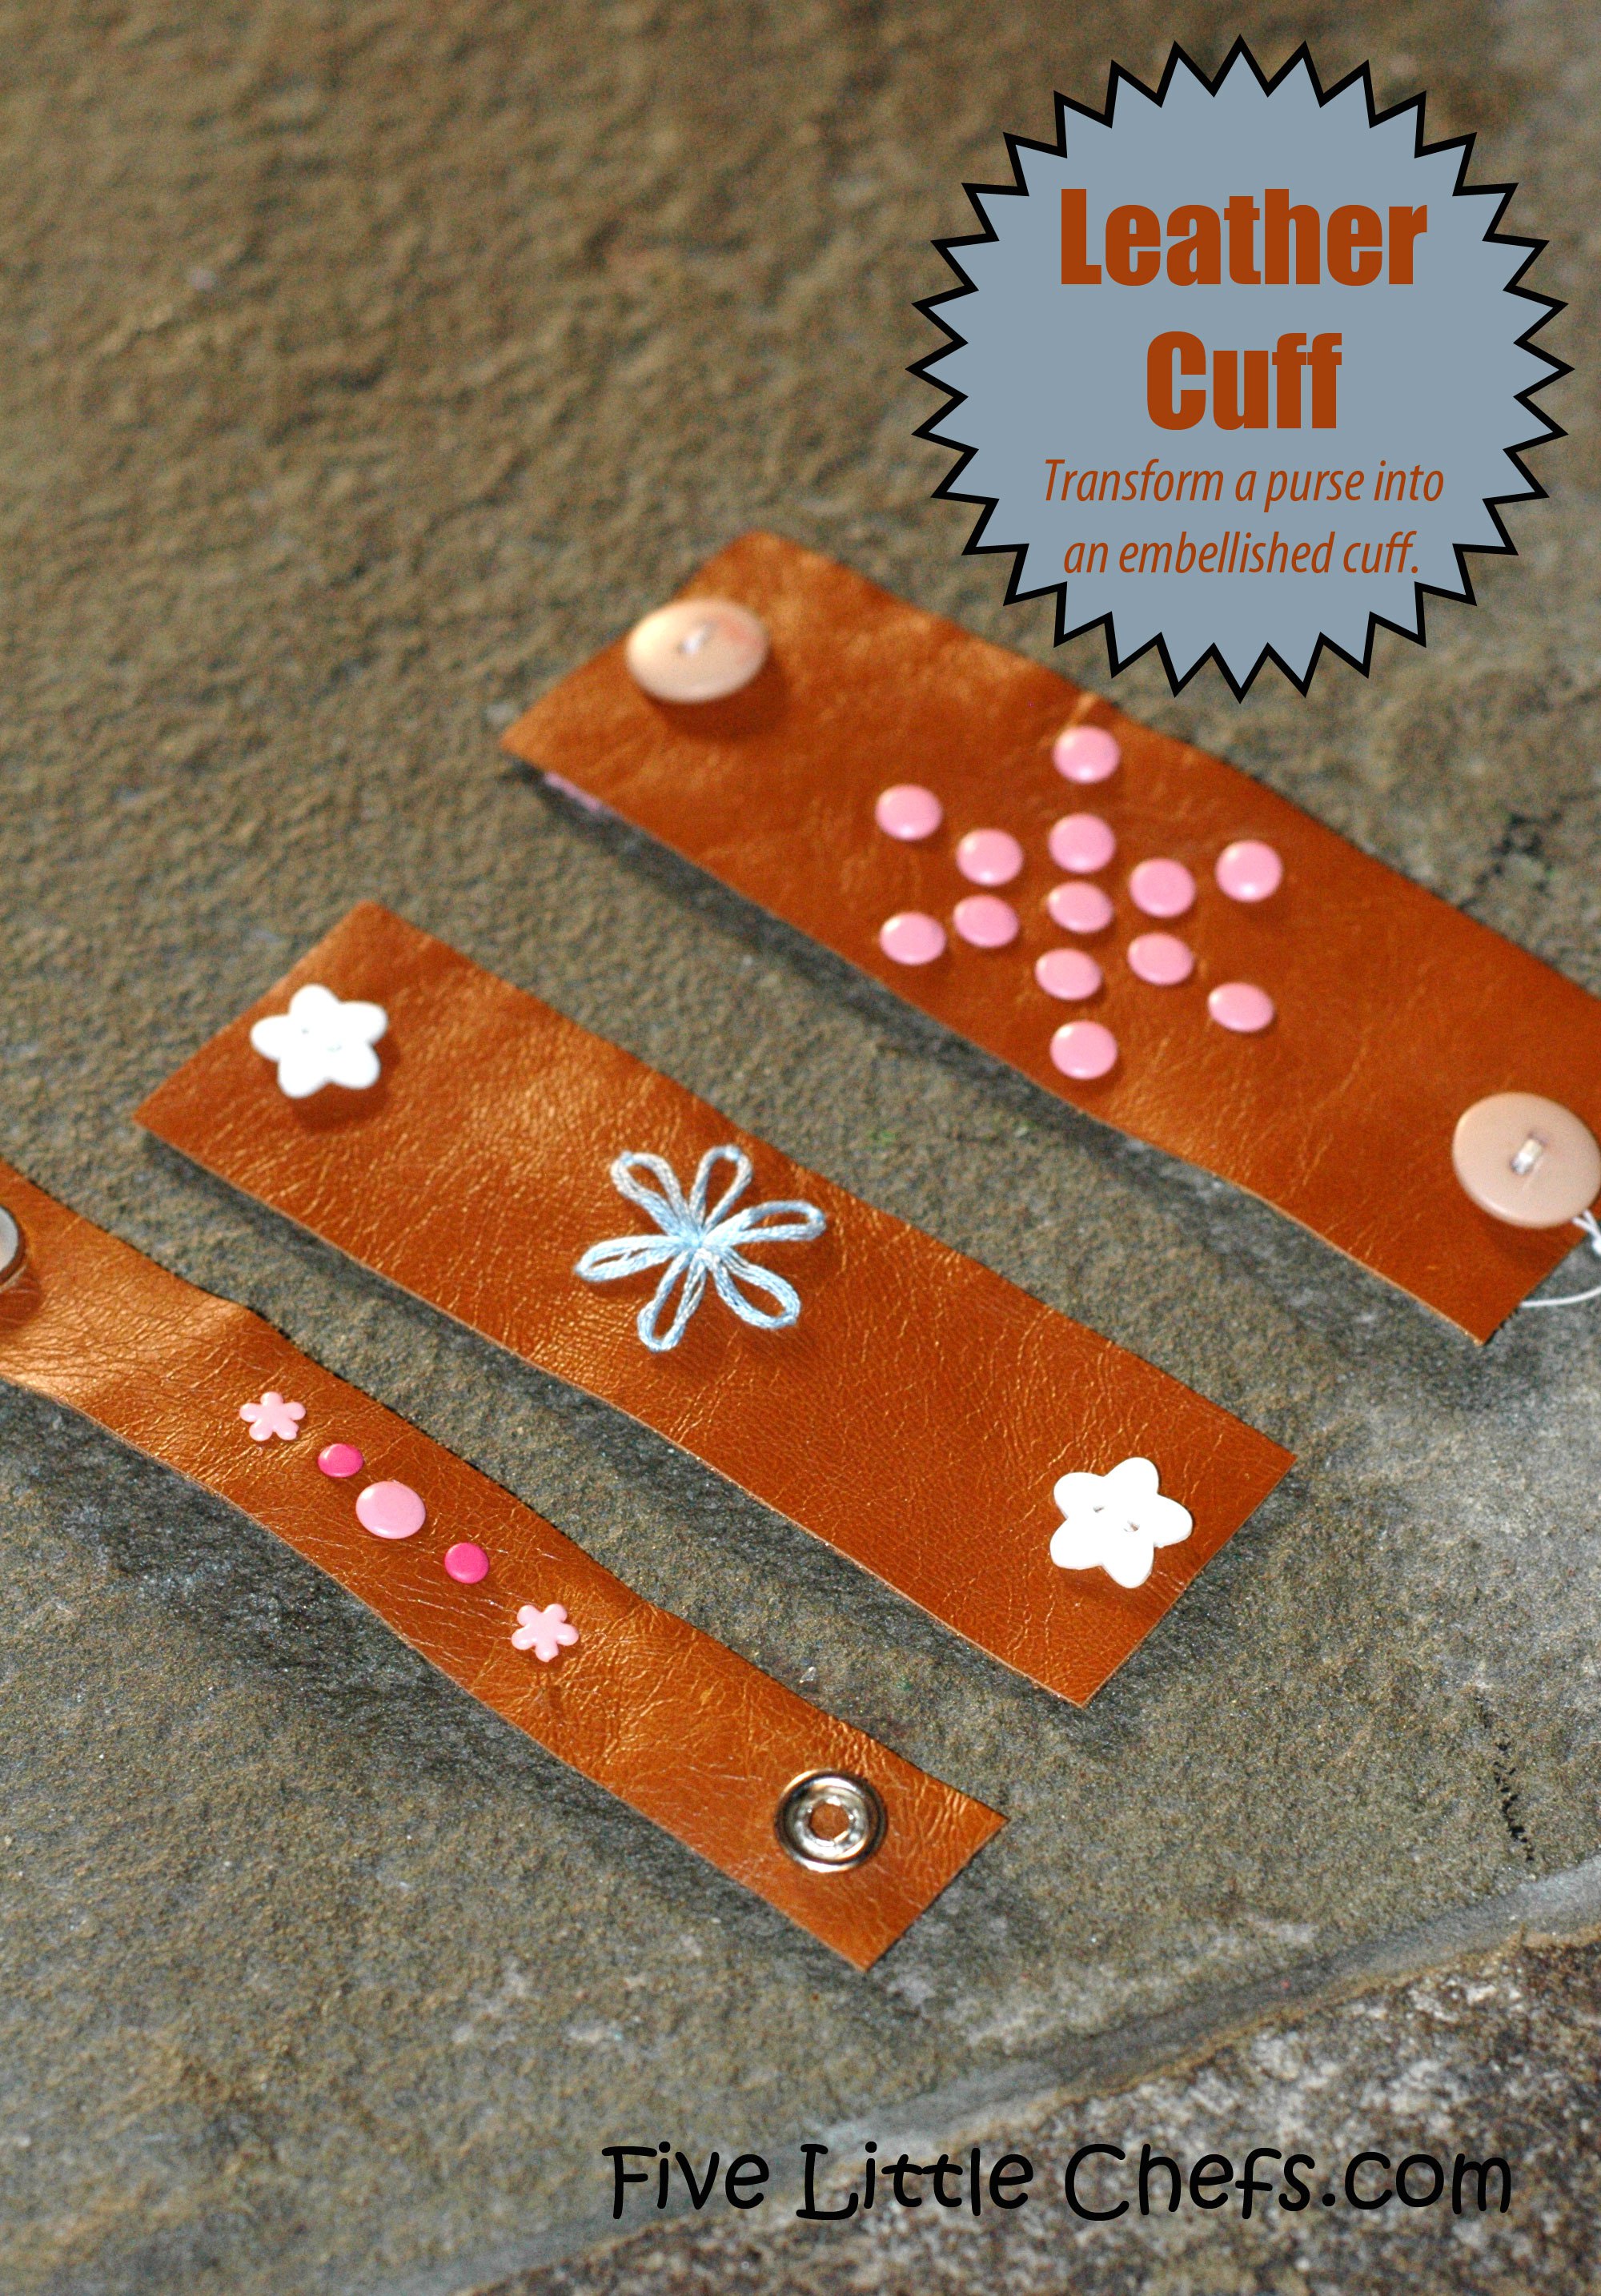 Do you have a leather/pleather purse or coat? Transform it into an embellished cuff at fivelittlechefs.com #cuff #kids crafts